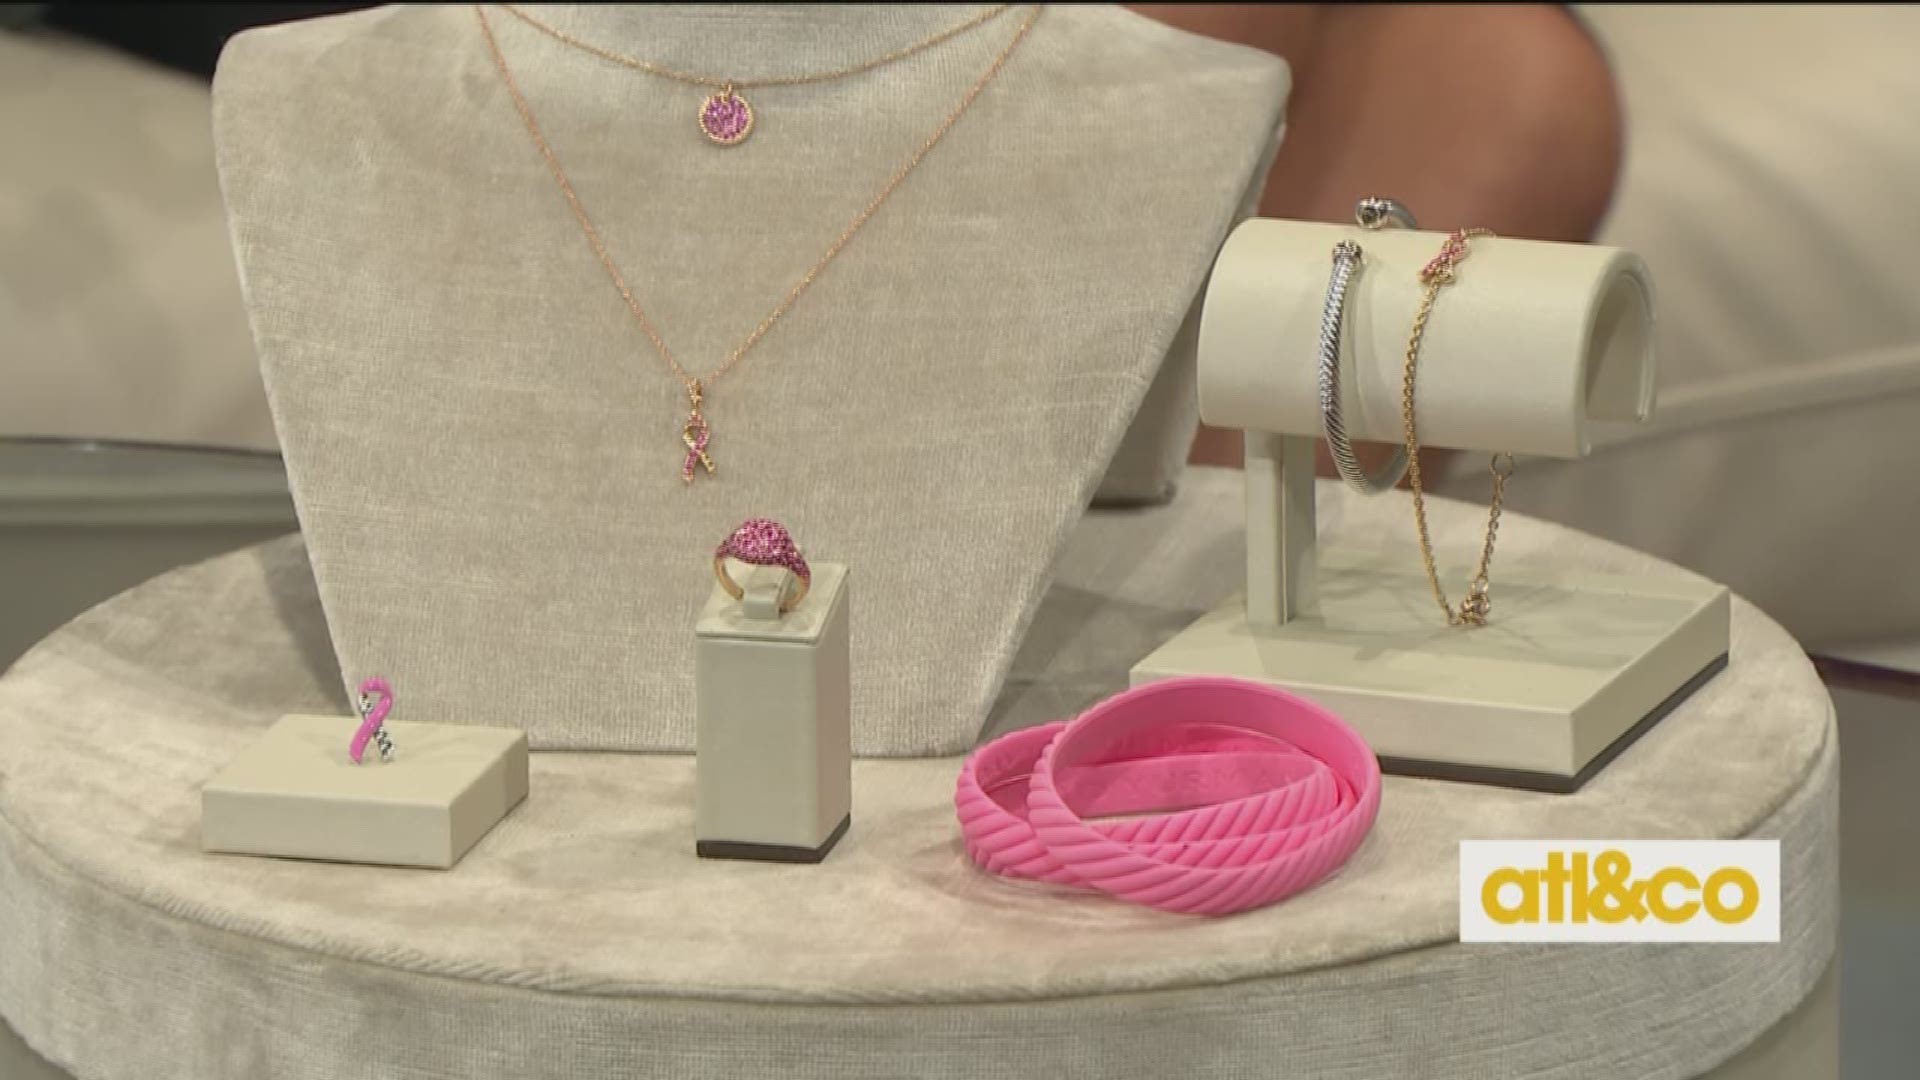 David Yurman shares their beautiful BCRF Collection, helping fund research to beat breast cancer.